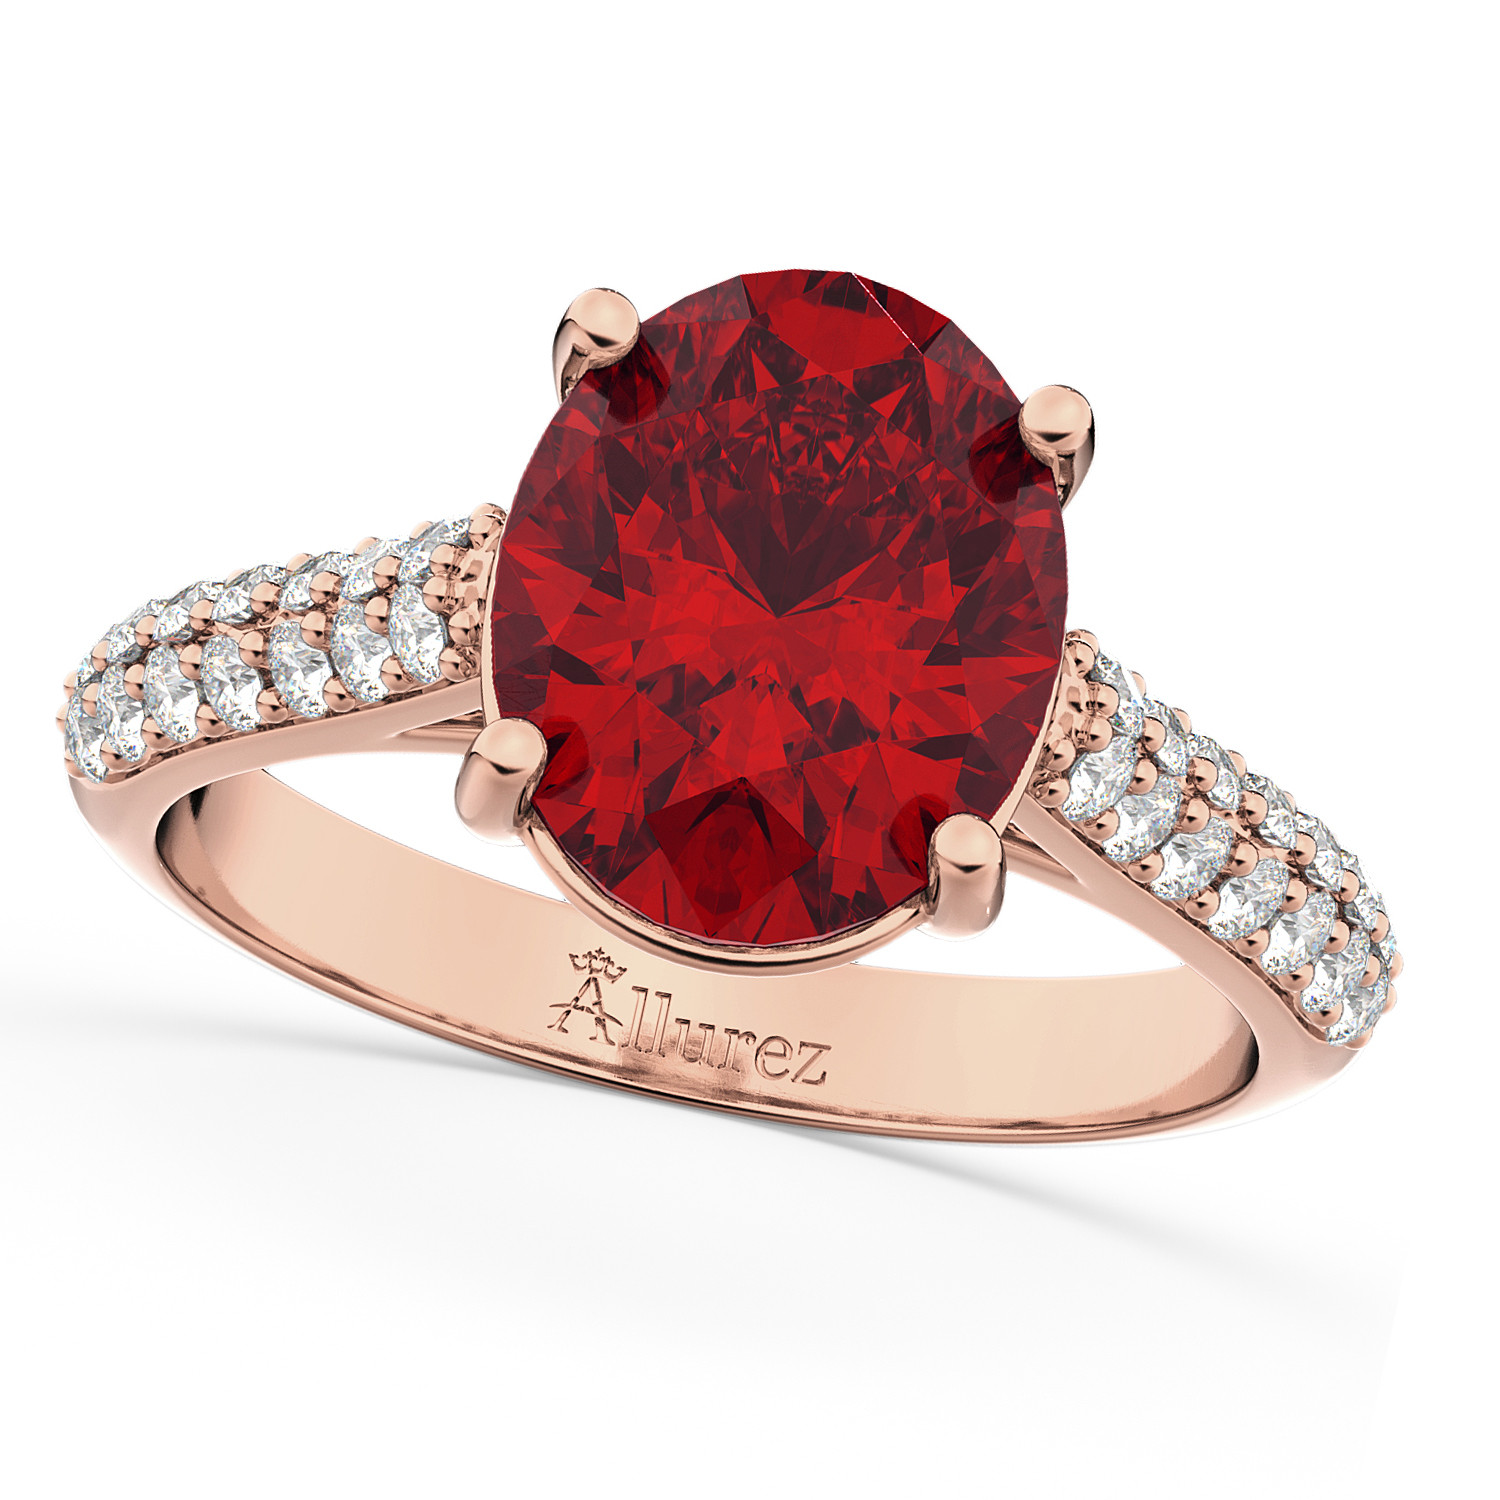 Ruby And Diamond Engagement Rings
 Oval Ruby & Diamond Engagement Ring 14k Rose Gold 4 42ct